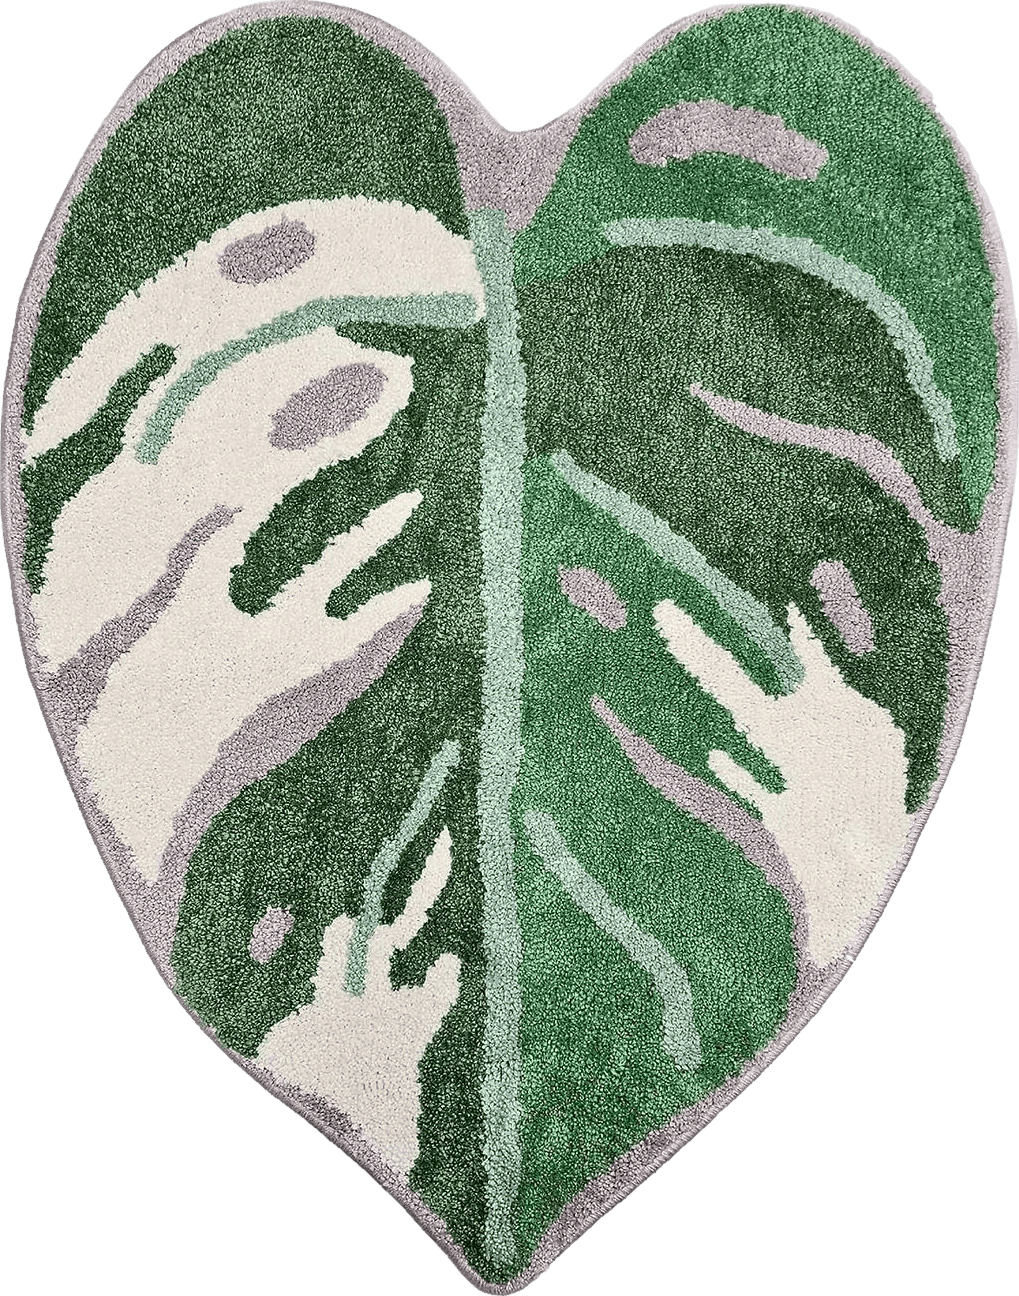 AKUJI Variegated Monstera 33.5" X 26" Non Slip Absorbent Tufted Leaf Rug - Plant Rugs for Bathroom, Baby Kids Room, Classroom, or Kitchen | Machine Washable Nature Bathmat or Home Decor Accessories